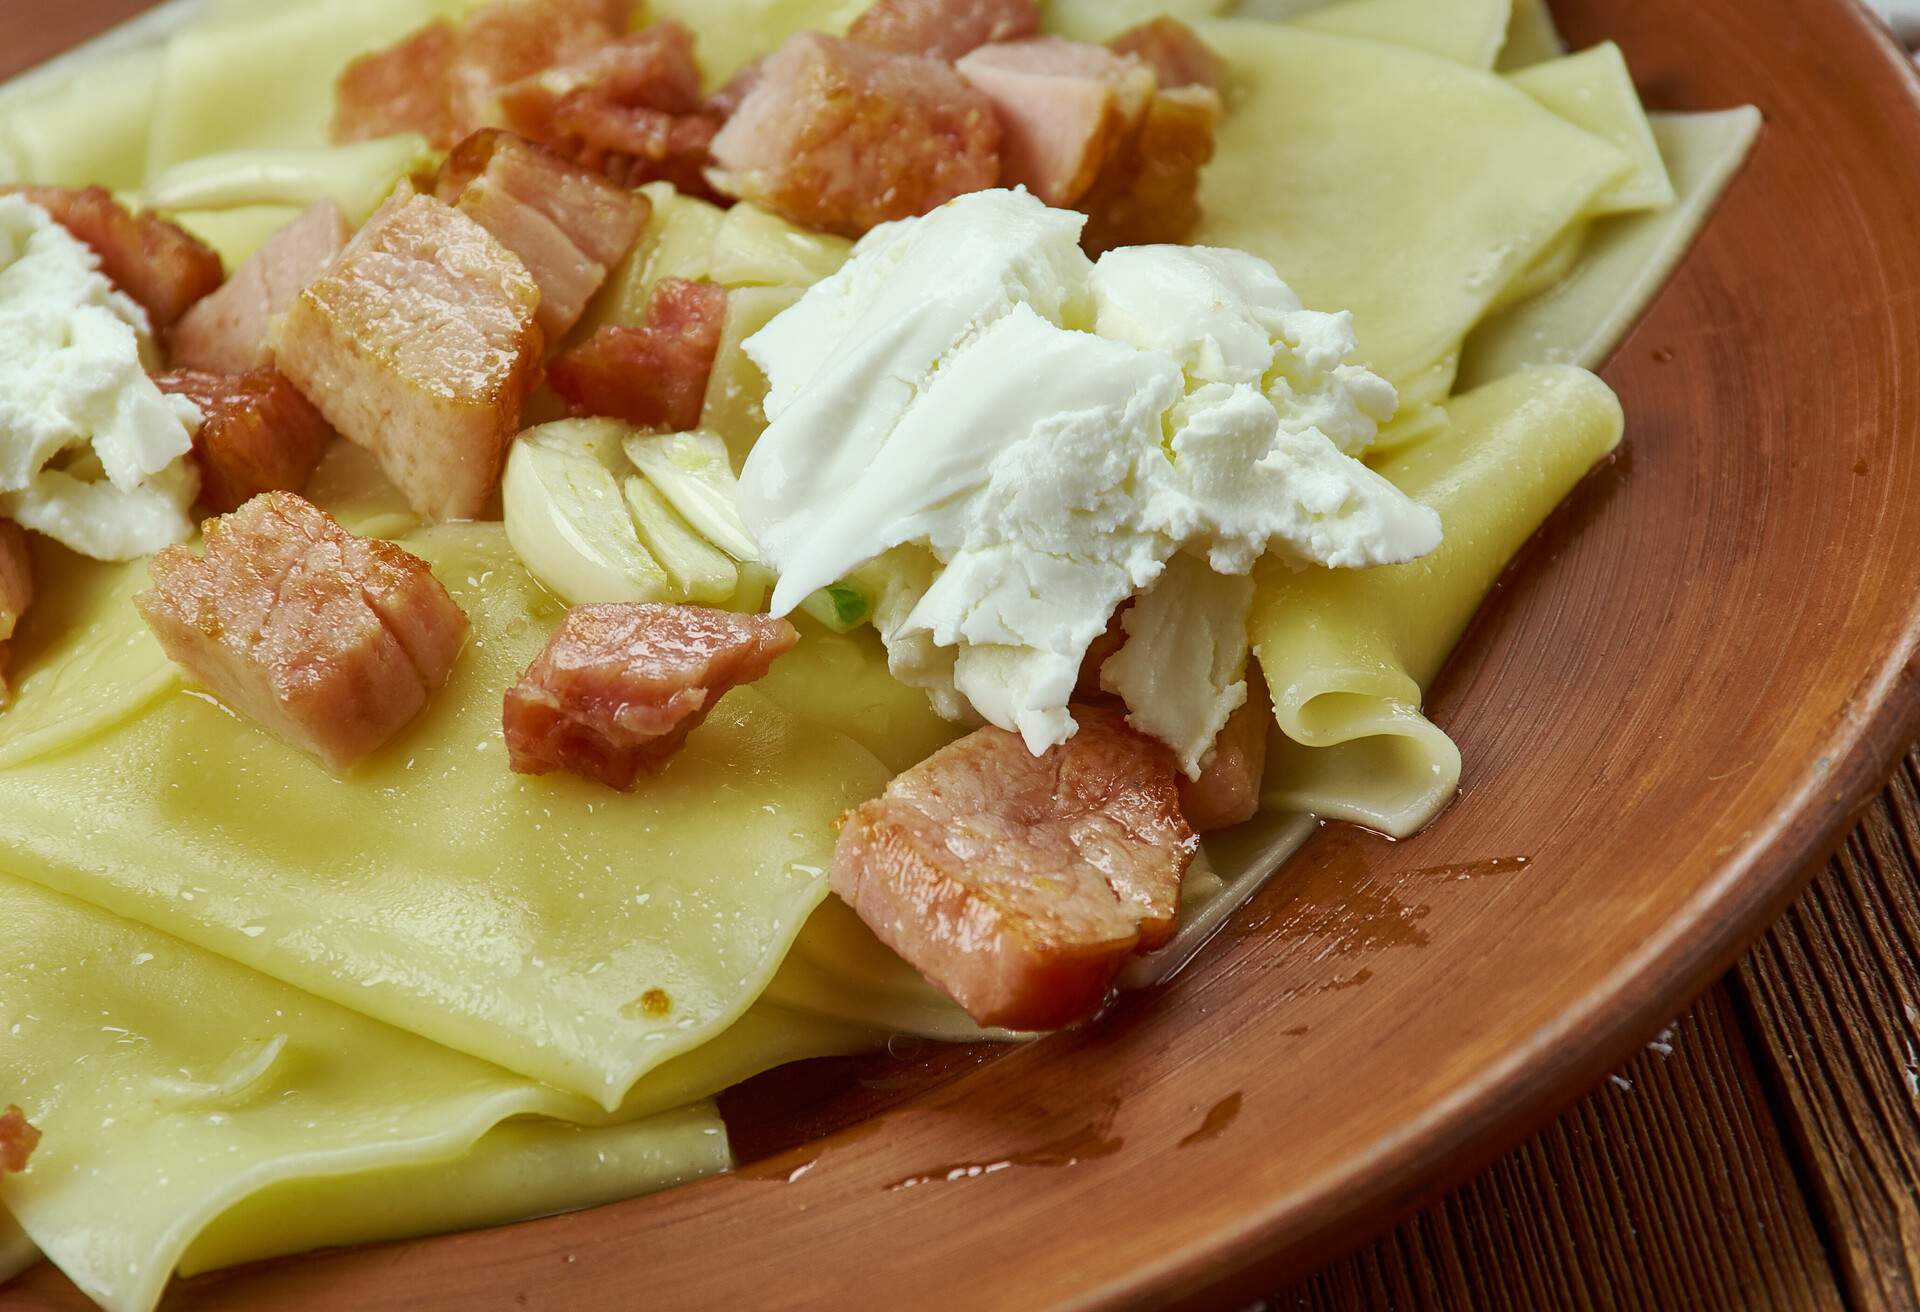 Lazanki -  Belarusian and Polish pasta dishes,  with melted pork fat  and sour cream.